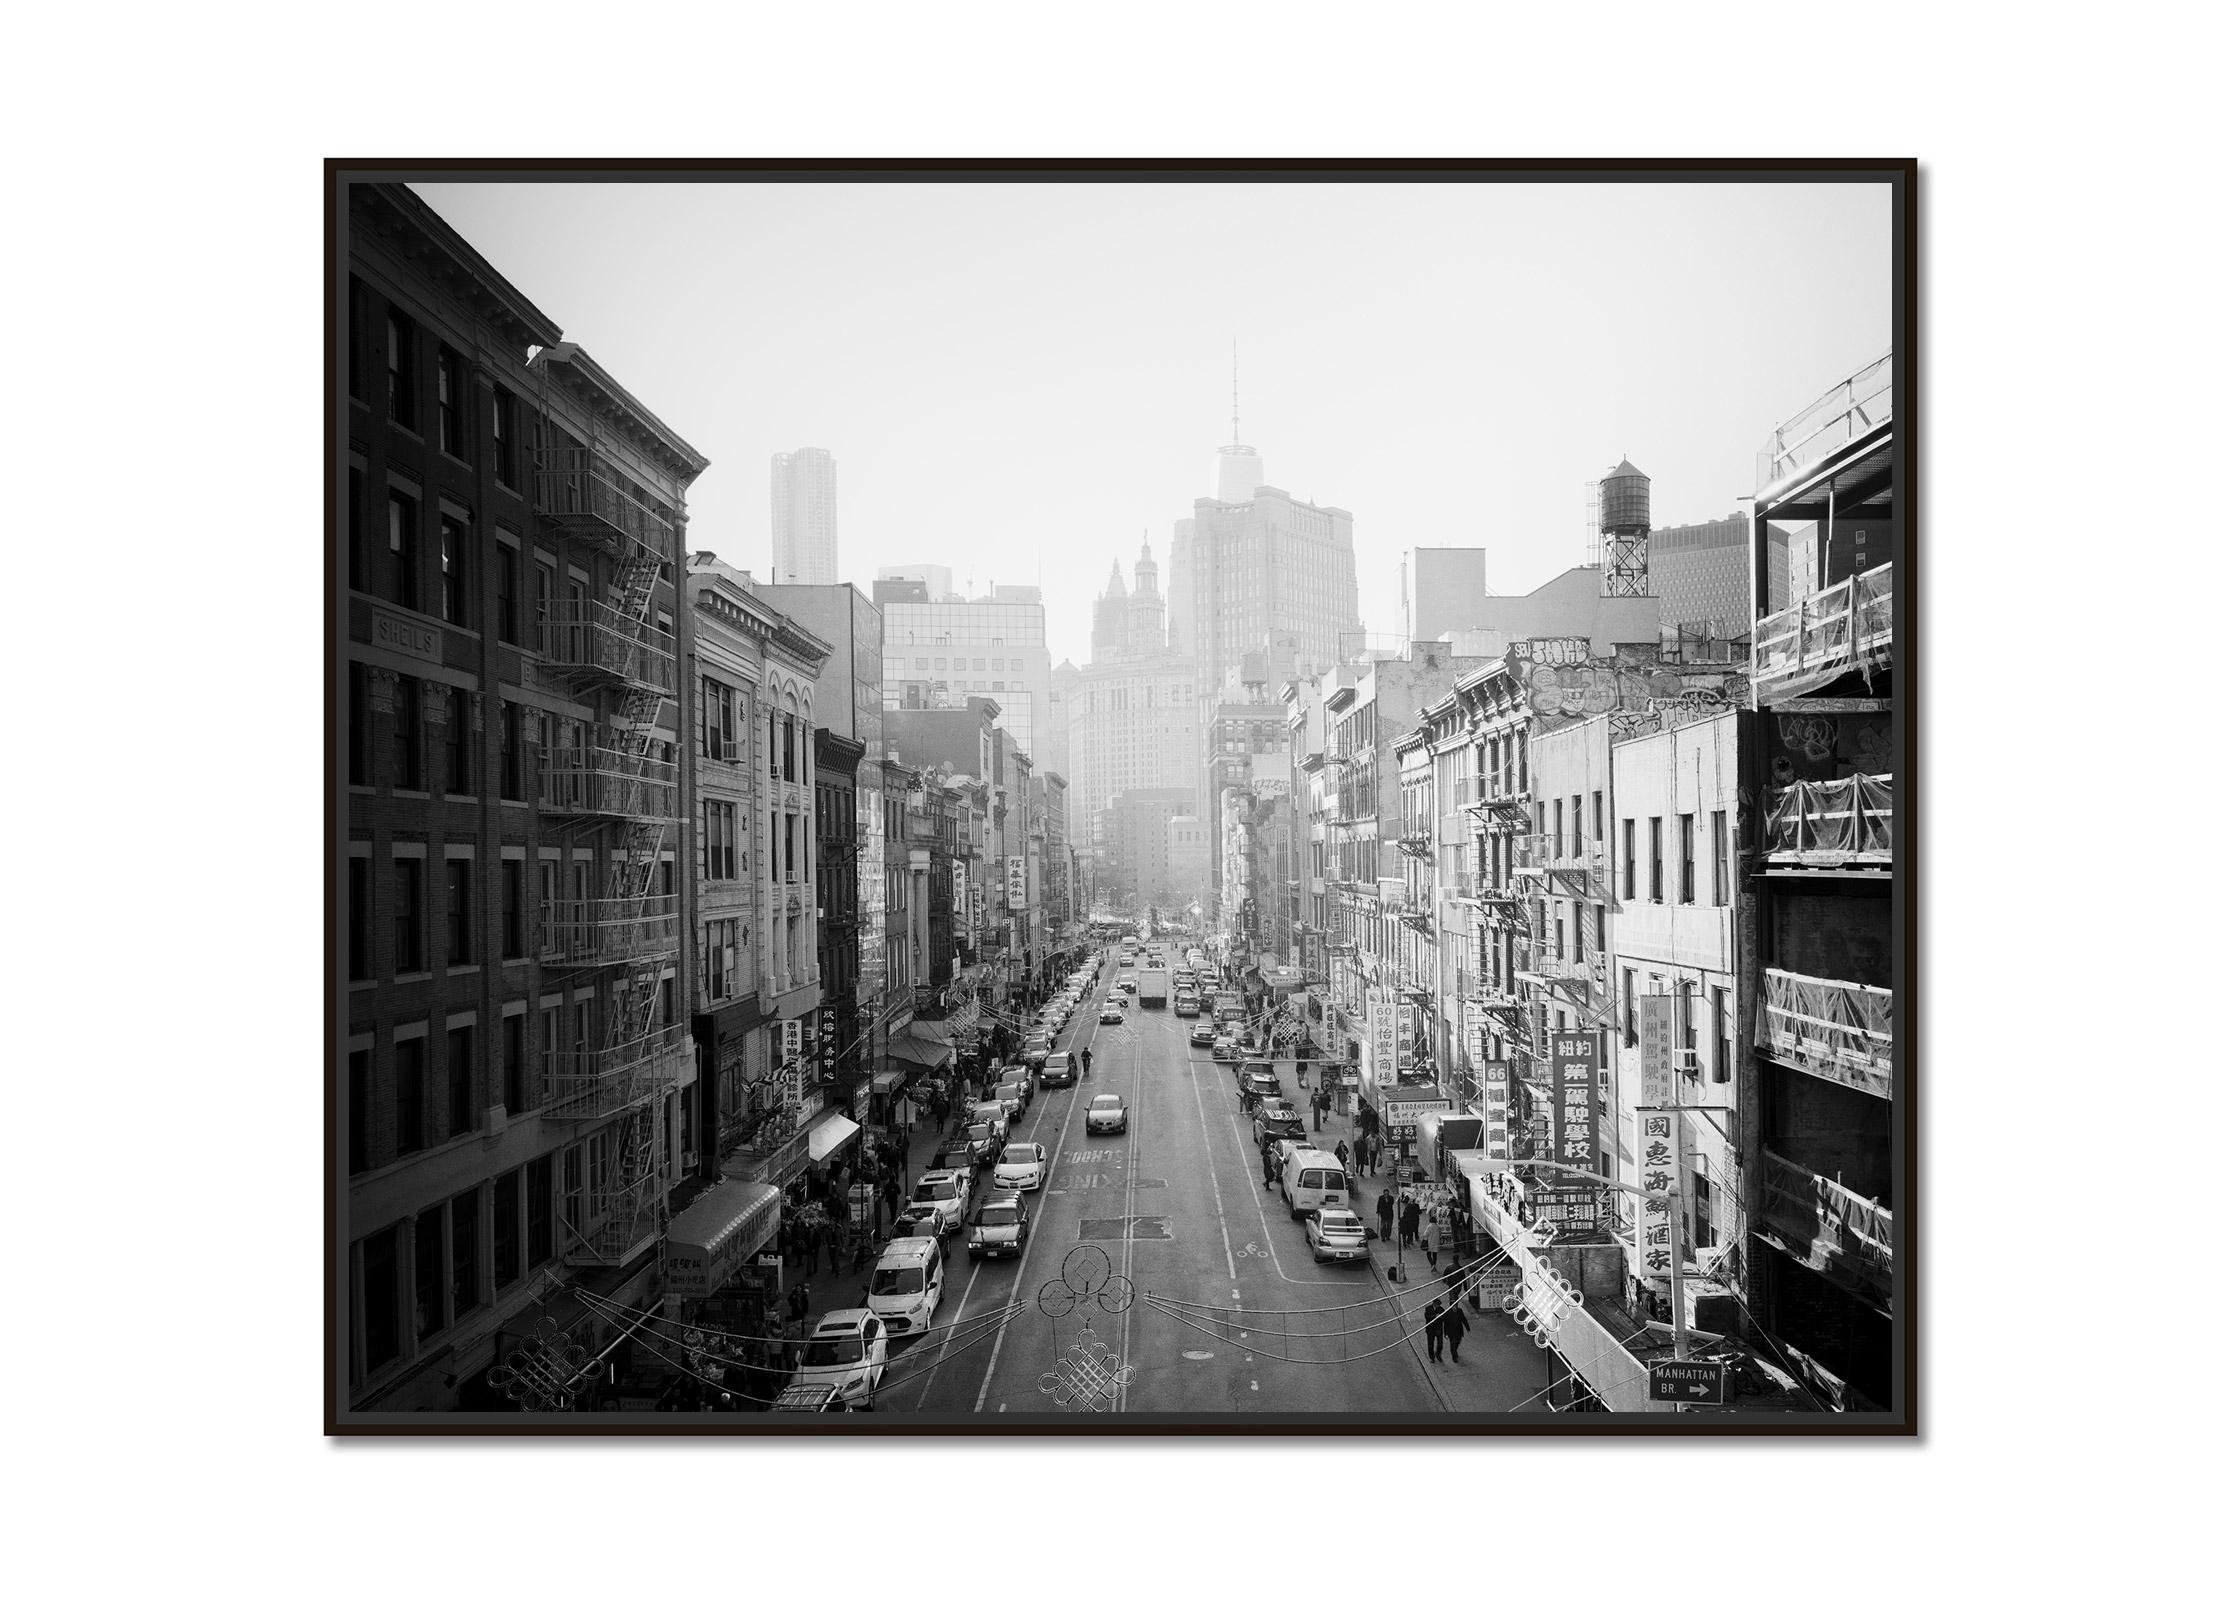 Chinatown, New York City, USA, black and white fine art cityscape photography - Photograph by Gerald Berghammer